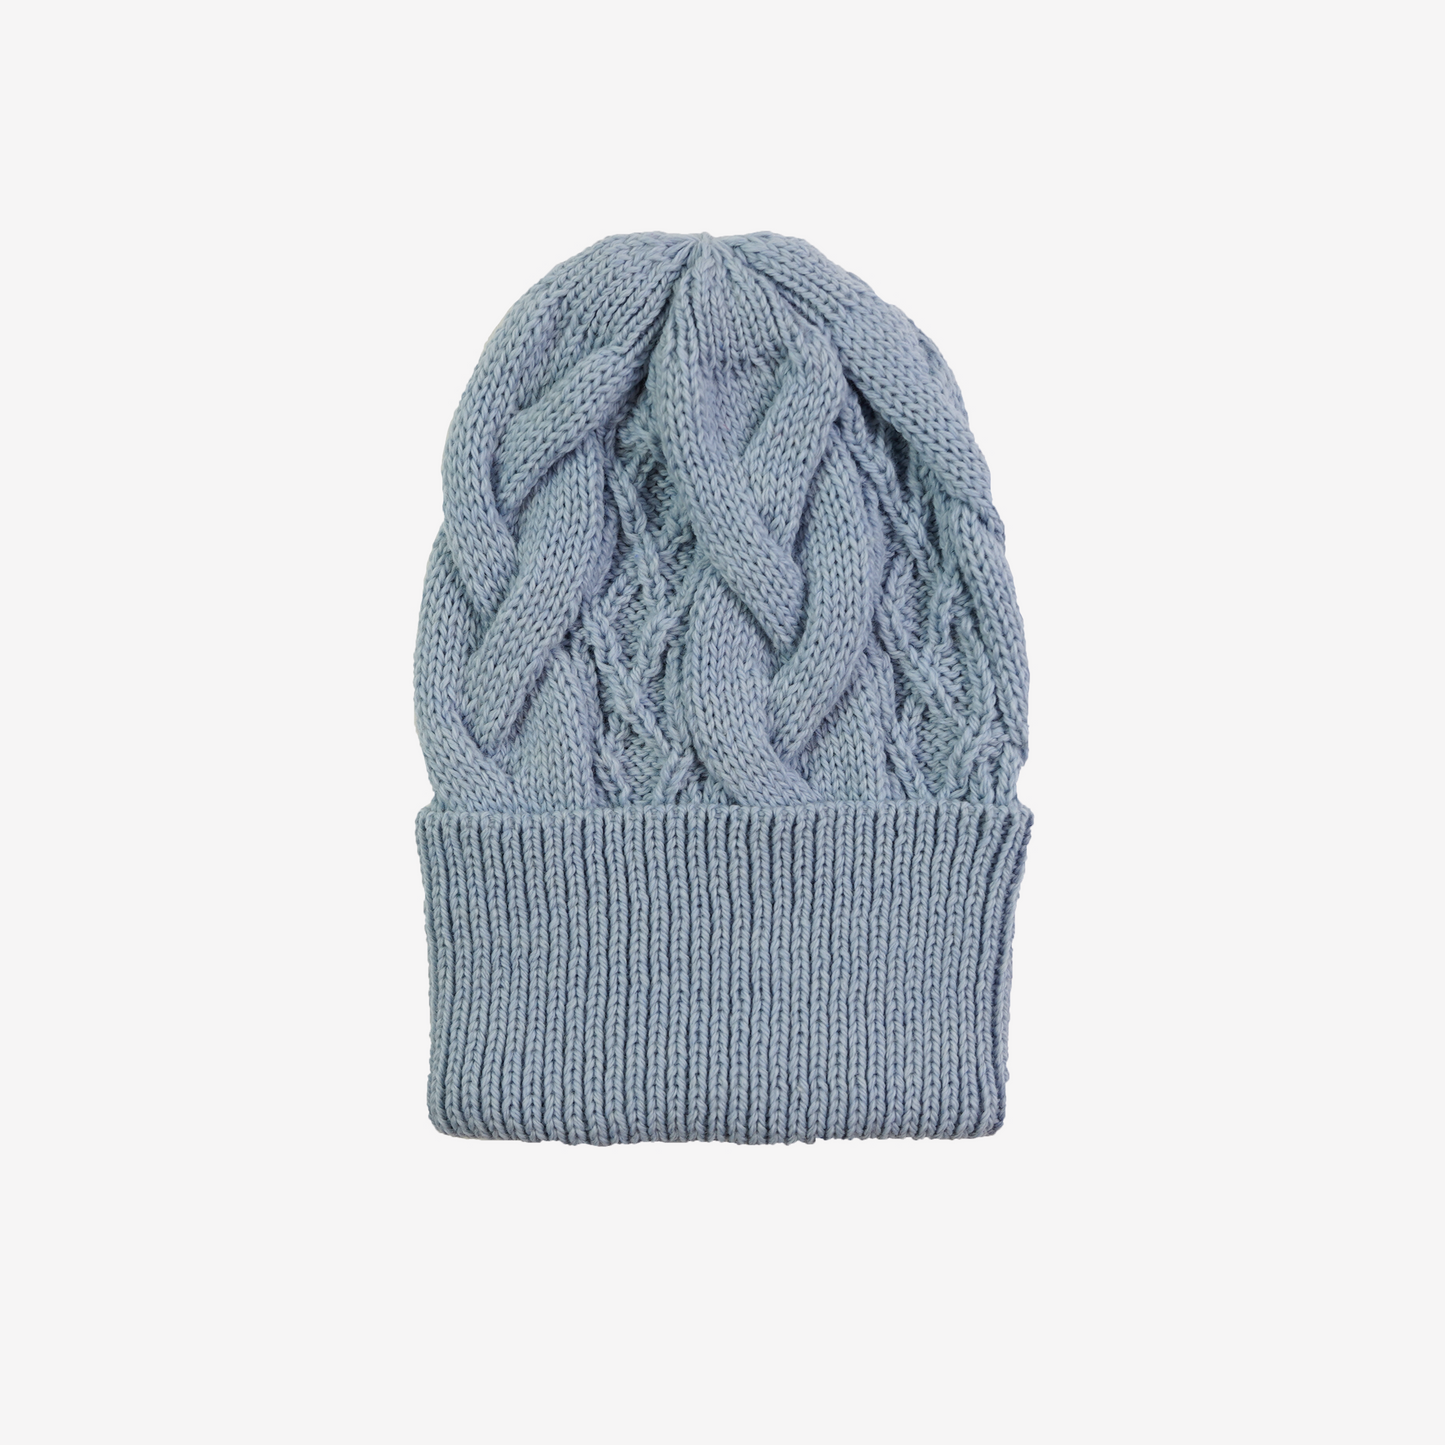 Cable Hat in Light Blue